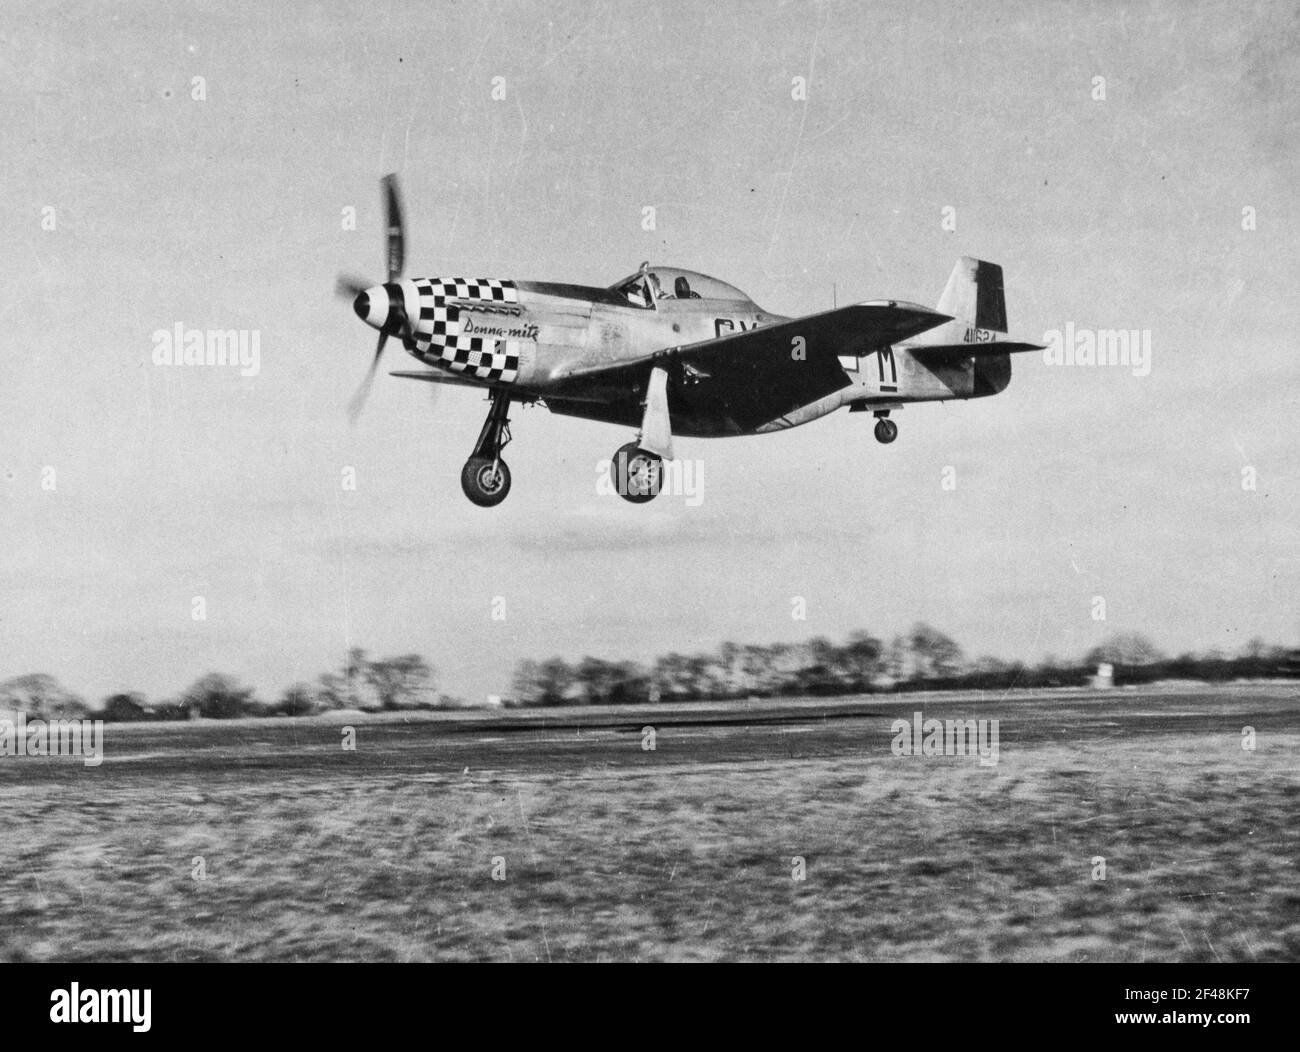 he North American P-51 'Donna-Mite' Of The 352Nd Fighter Squadron, 353 Fighter Group, Lands At Its English Base After An Escort Mission Over Europe. February 1945 Stock Photo